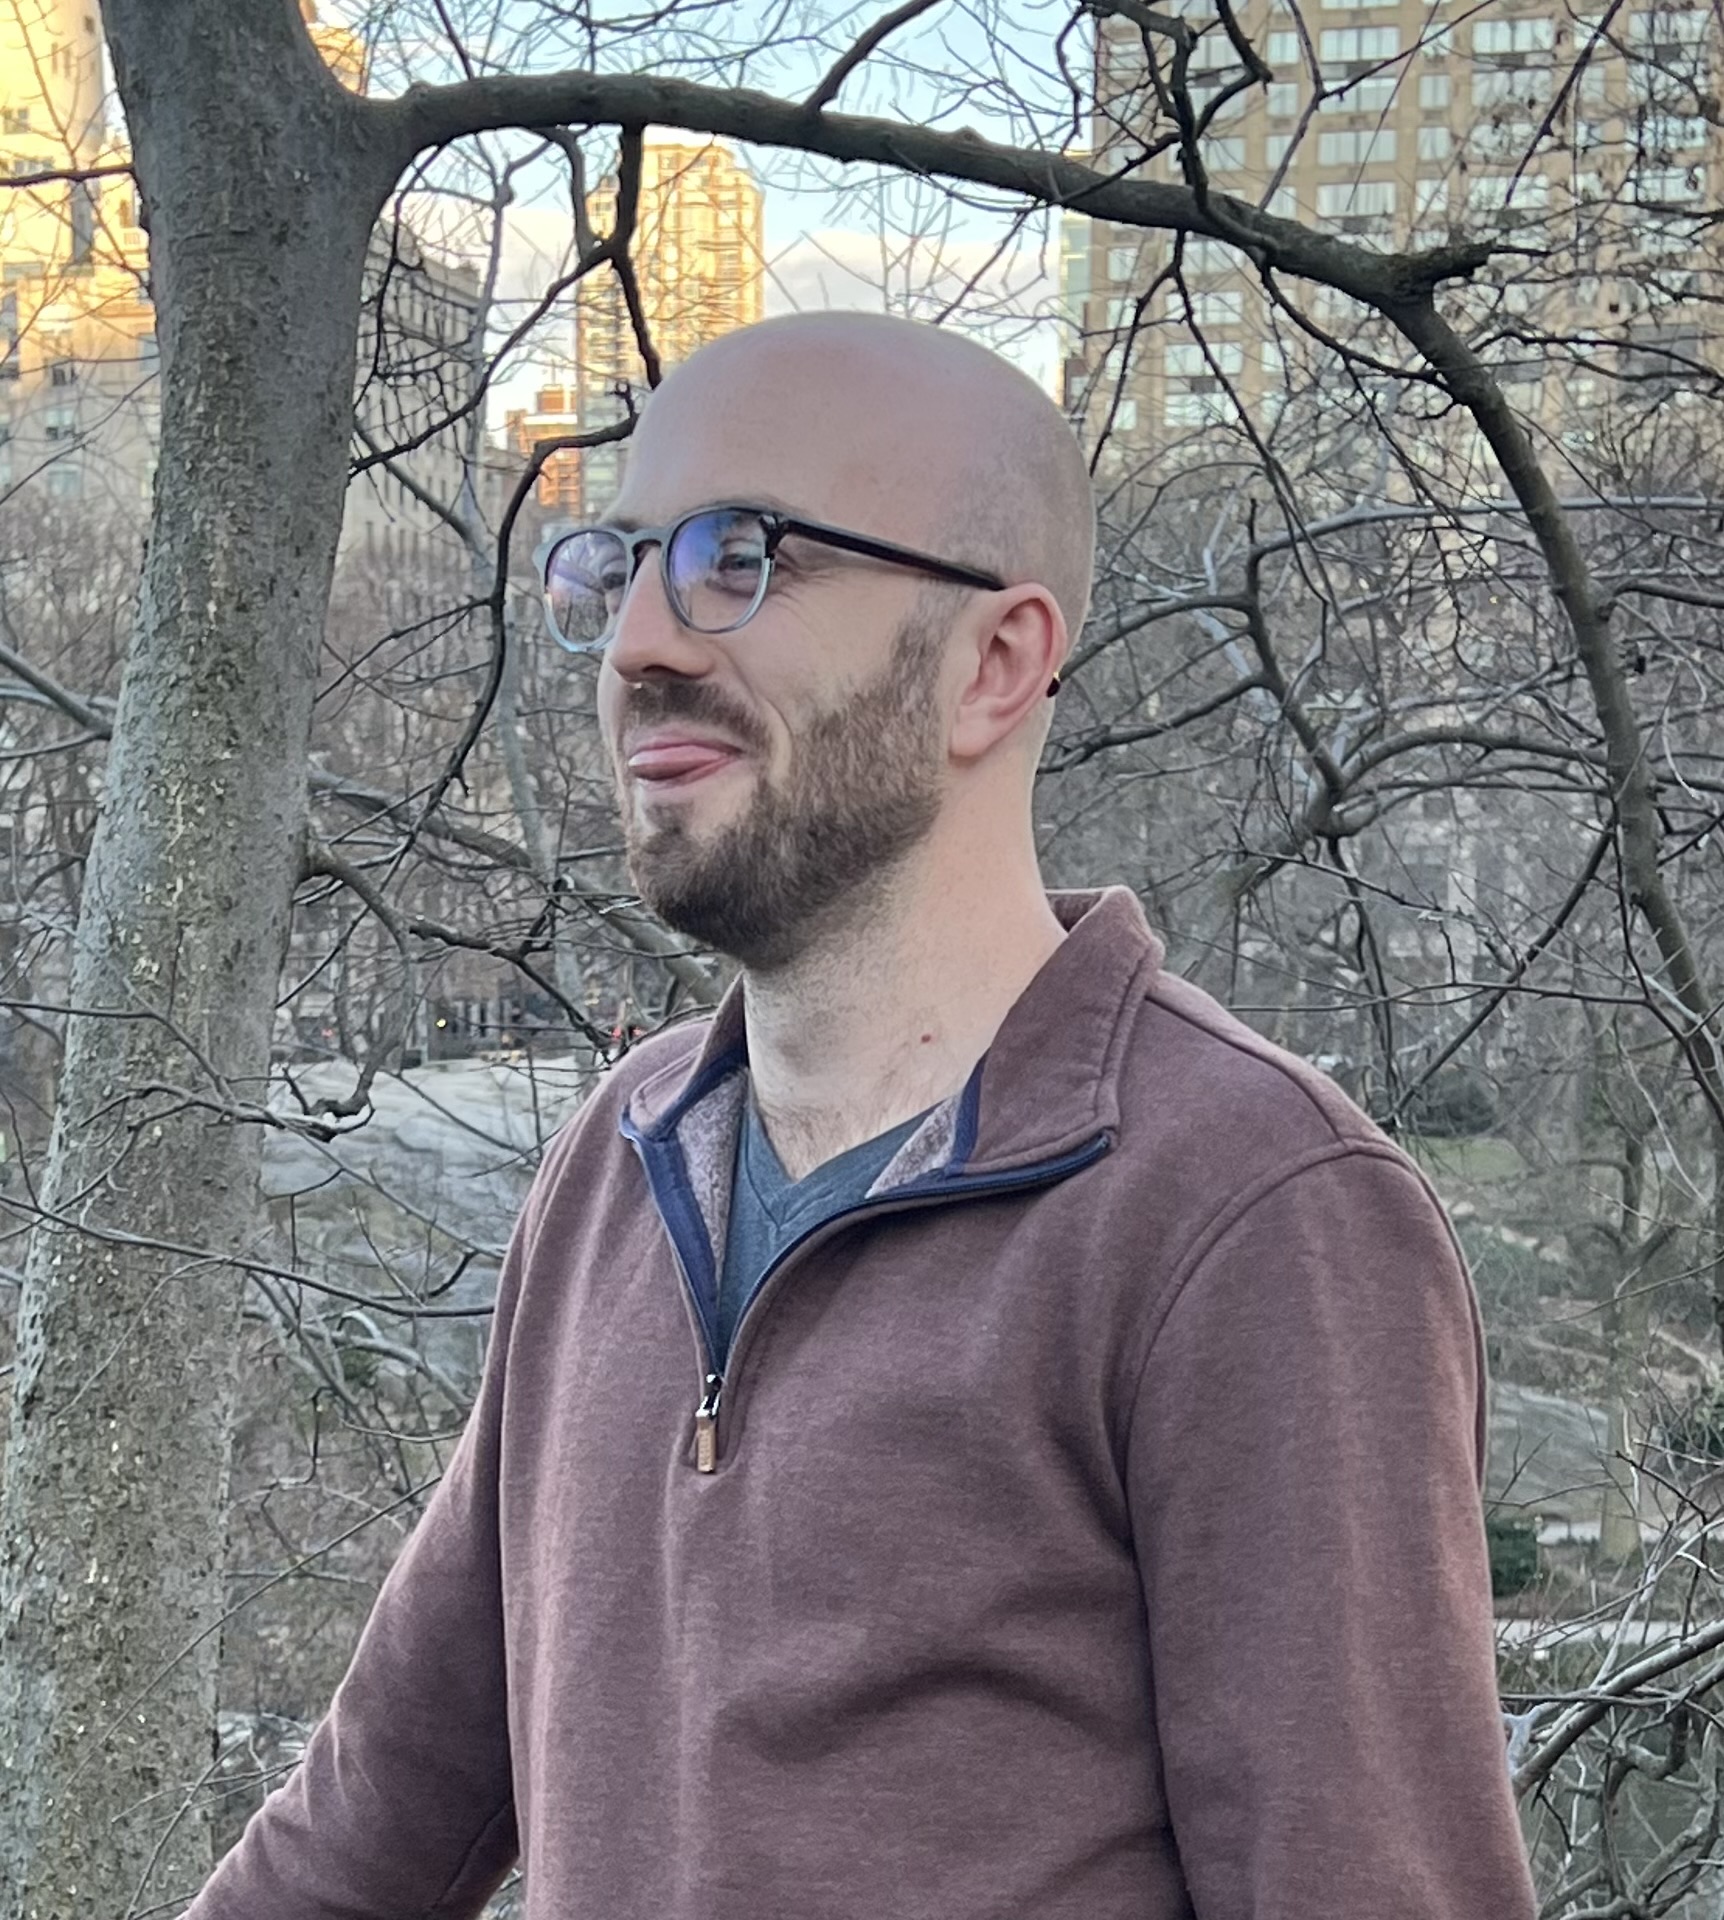 Mitchell White at Central Park, staring off into the distance